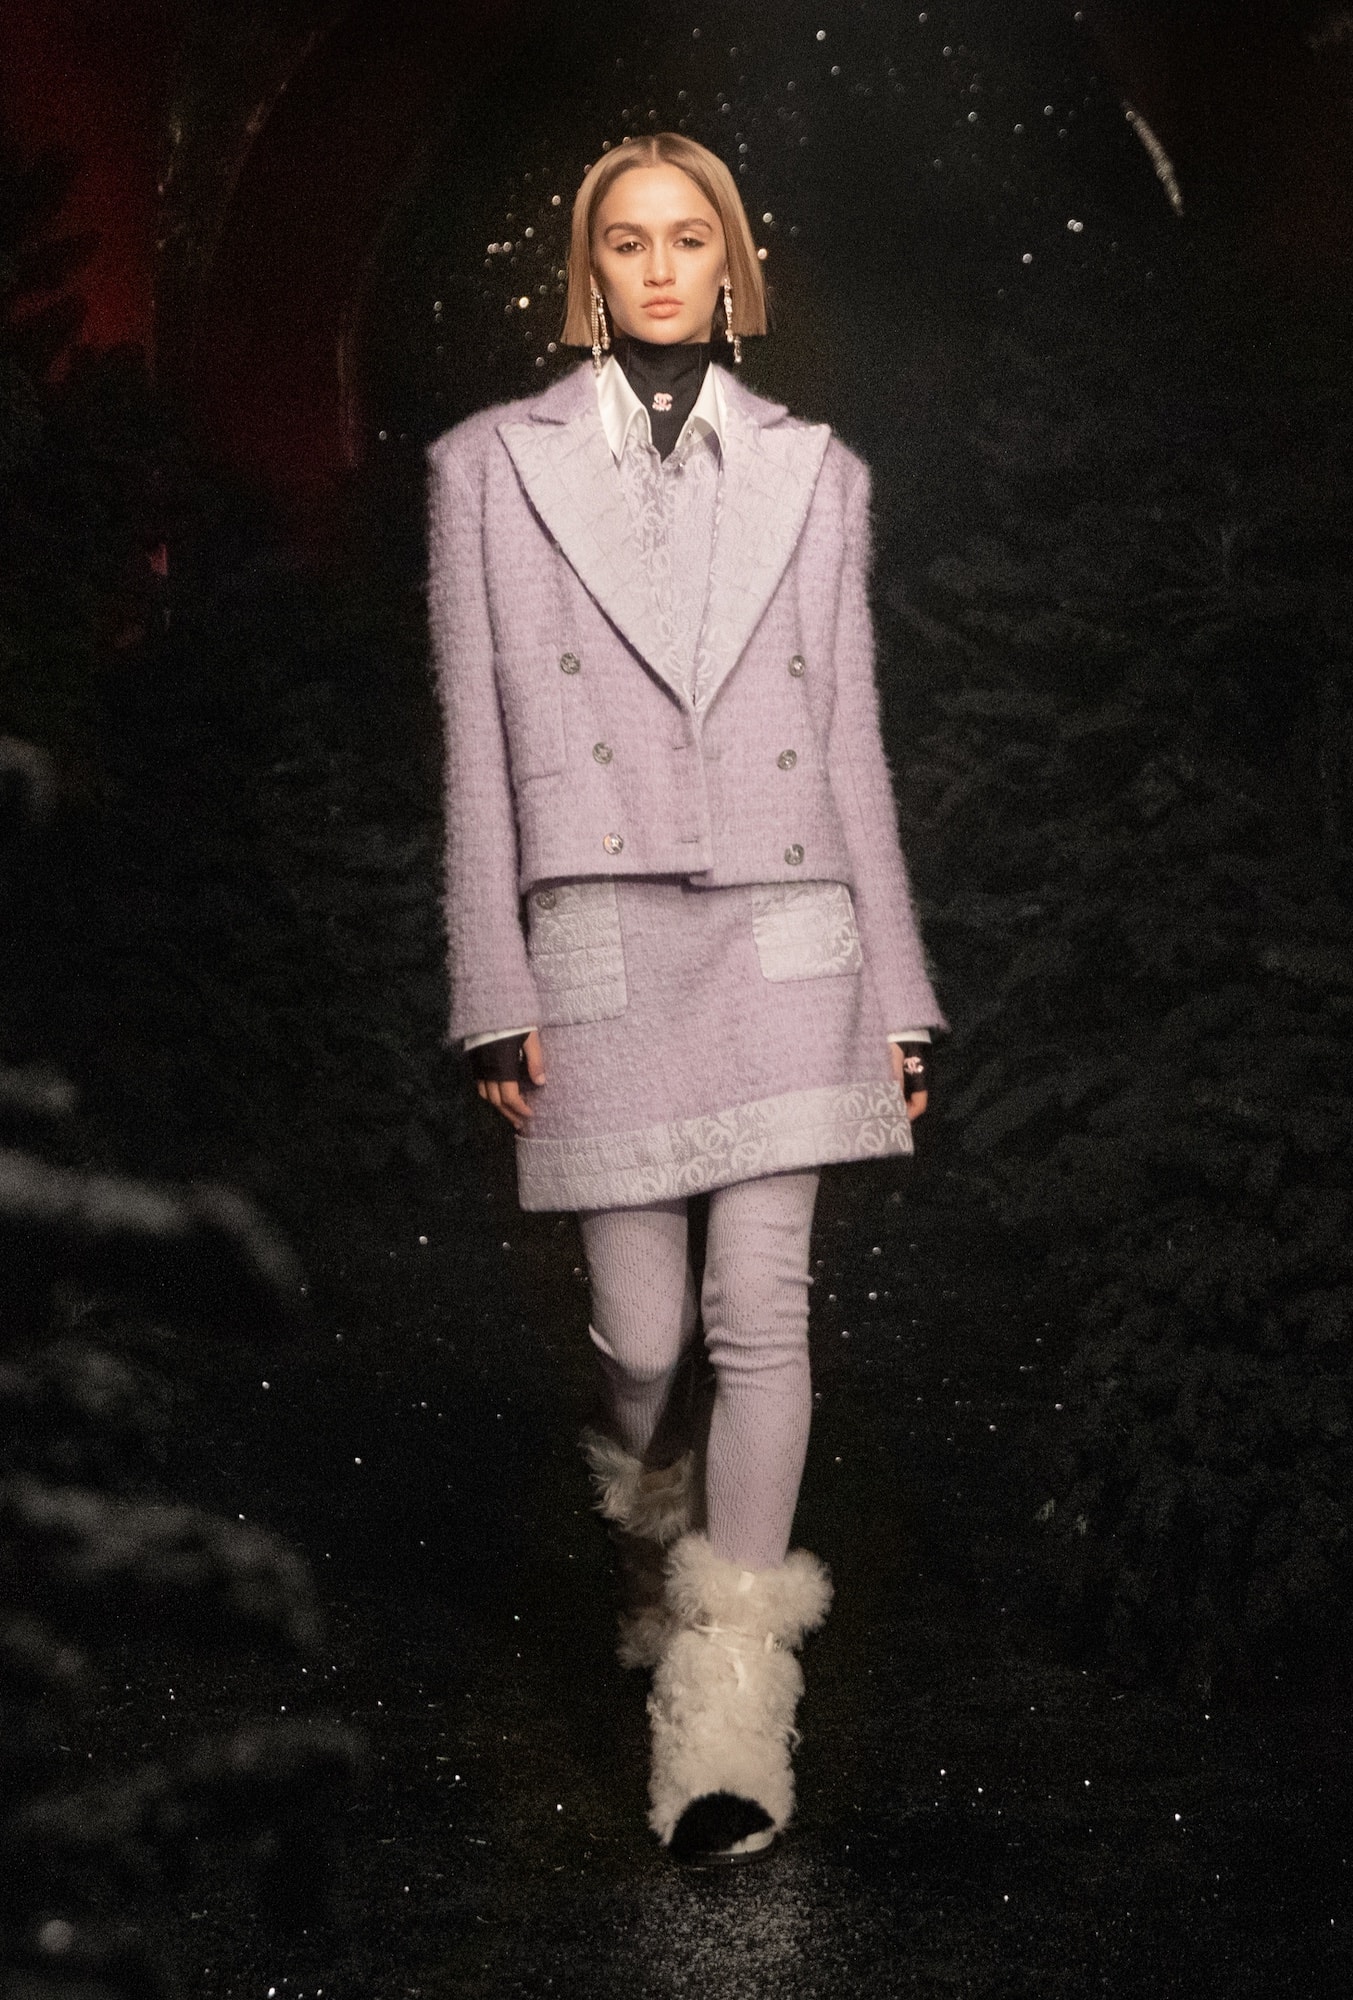 Chanel Fall/Winter 2021 Ready-to-Wear Collection Virginie Viard 70s Inspiration Karl Lagerfeld